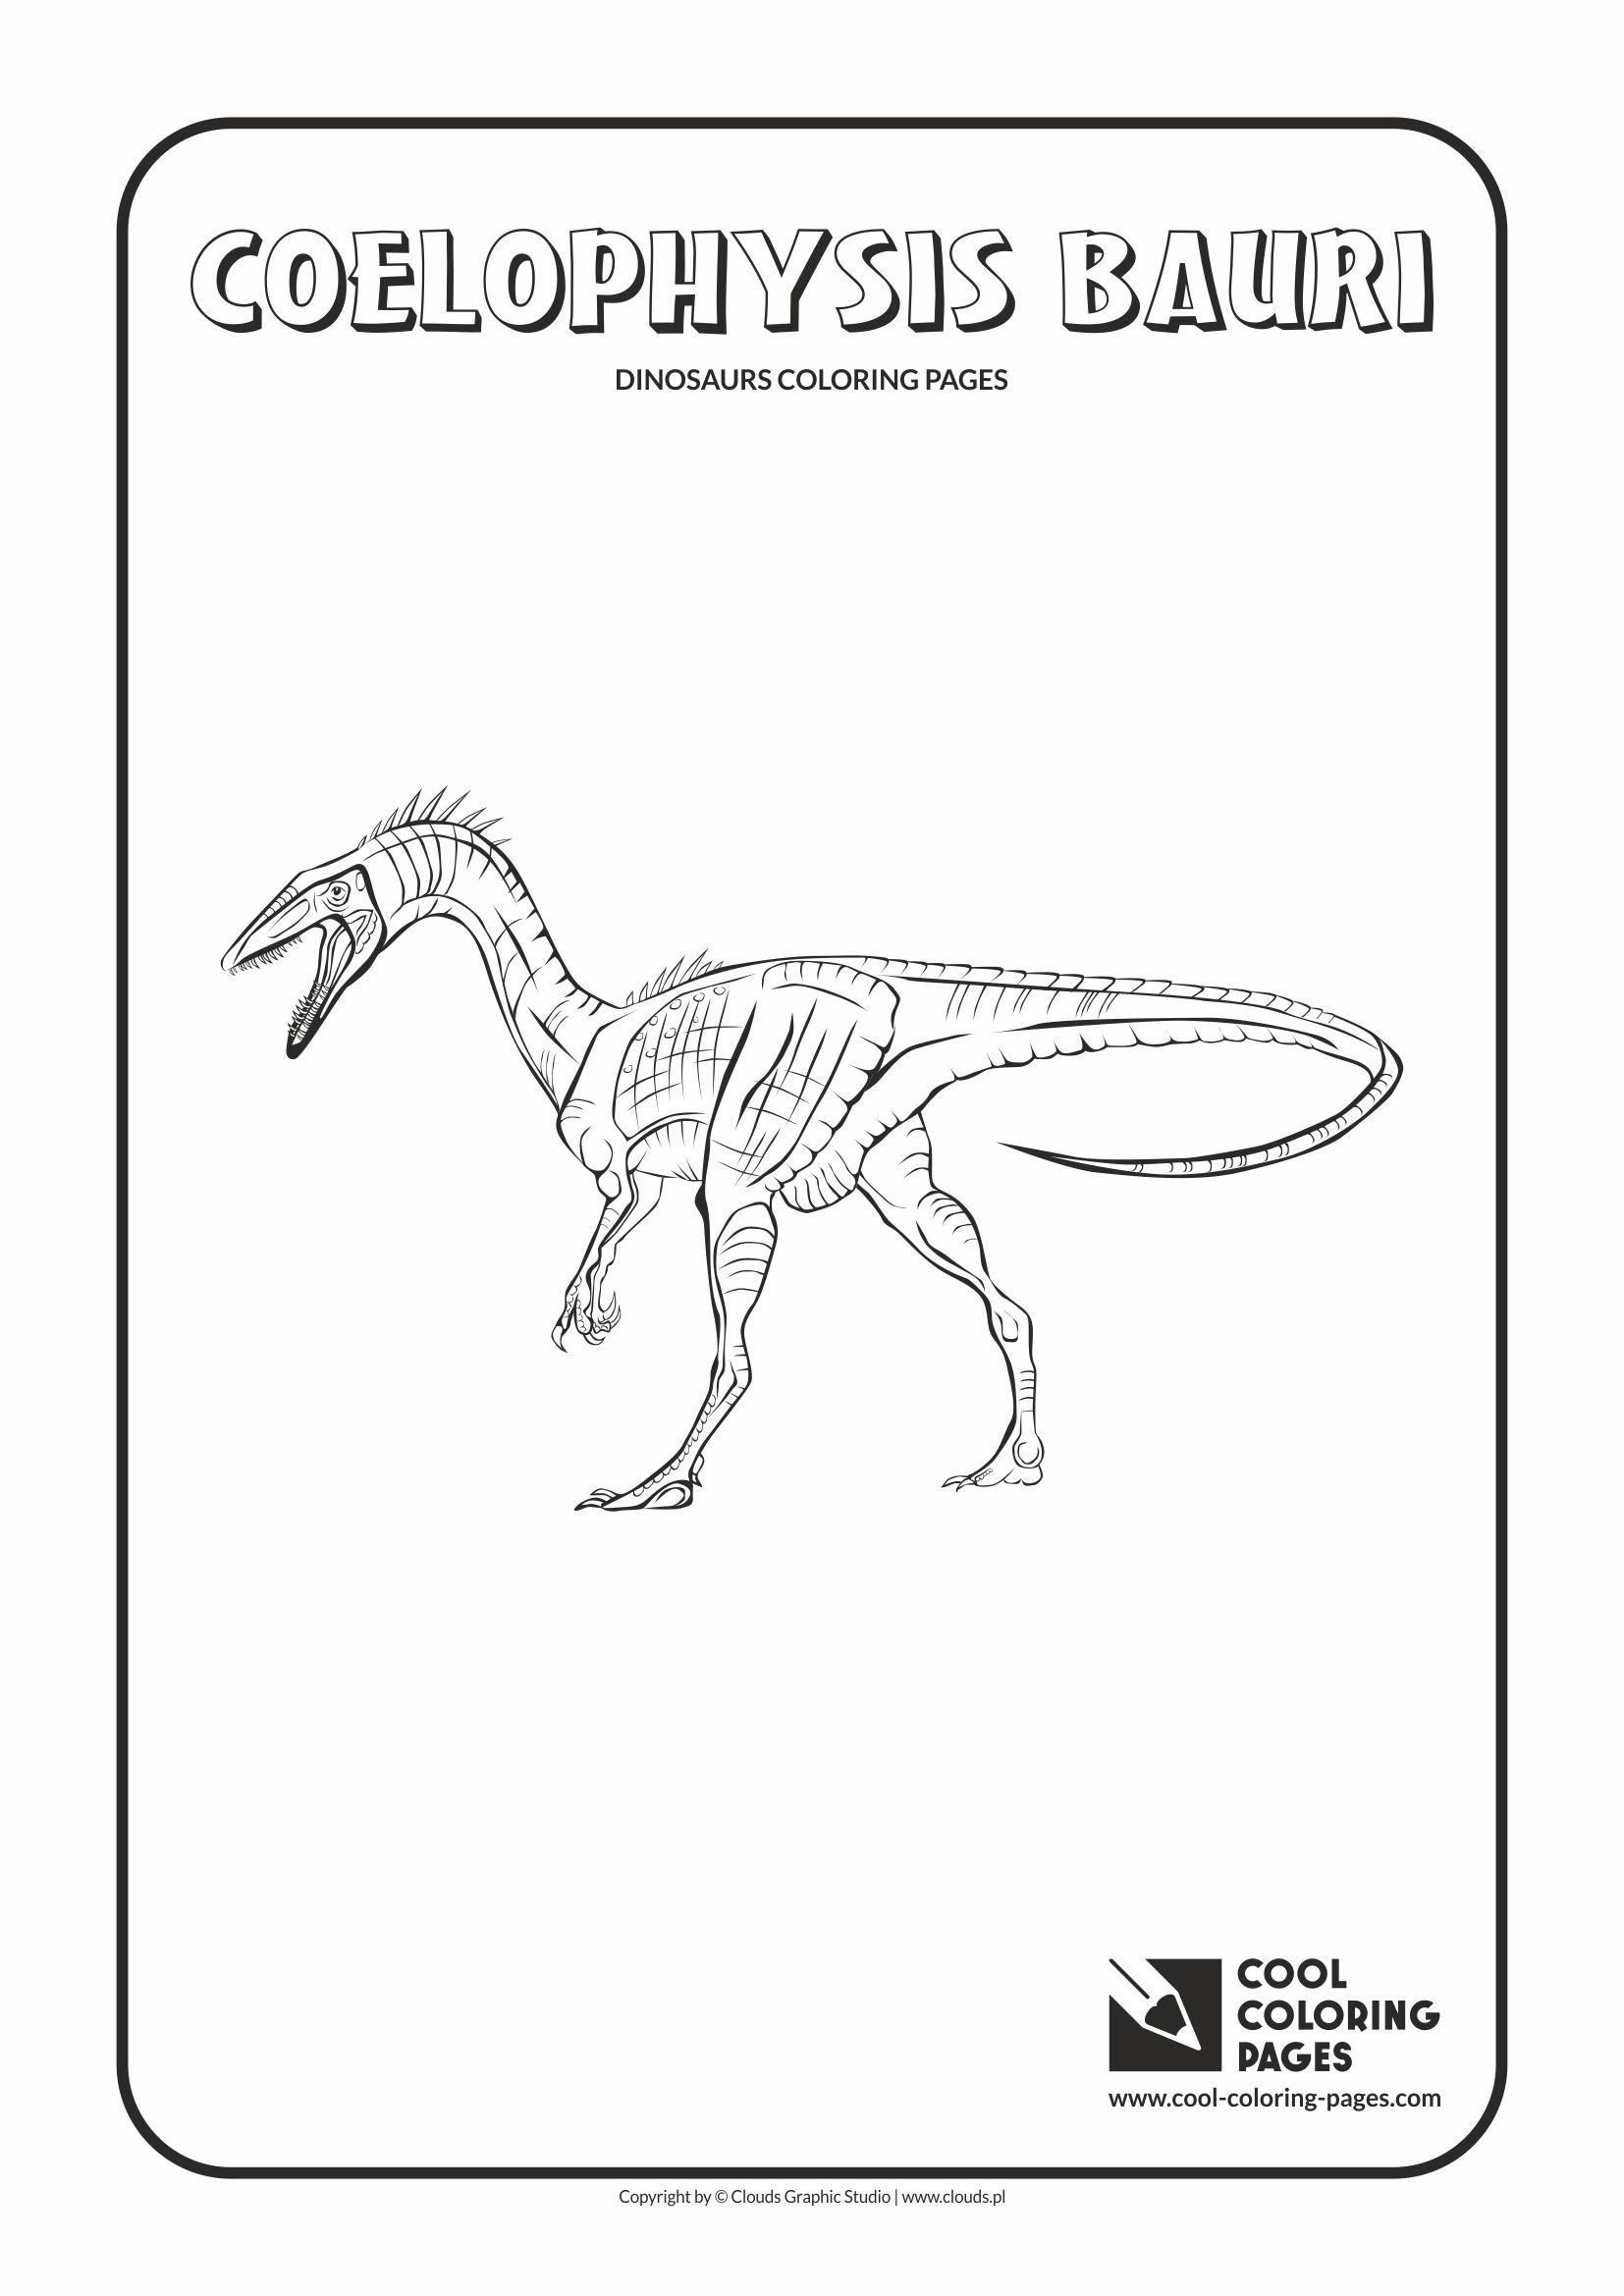 Cool Coloring Pages - Animals / Coelophysis bauri / Coloring page with Coelophysis bauri